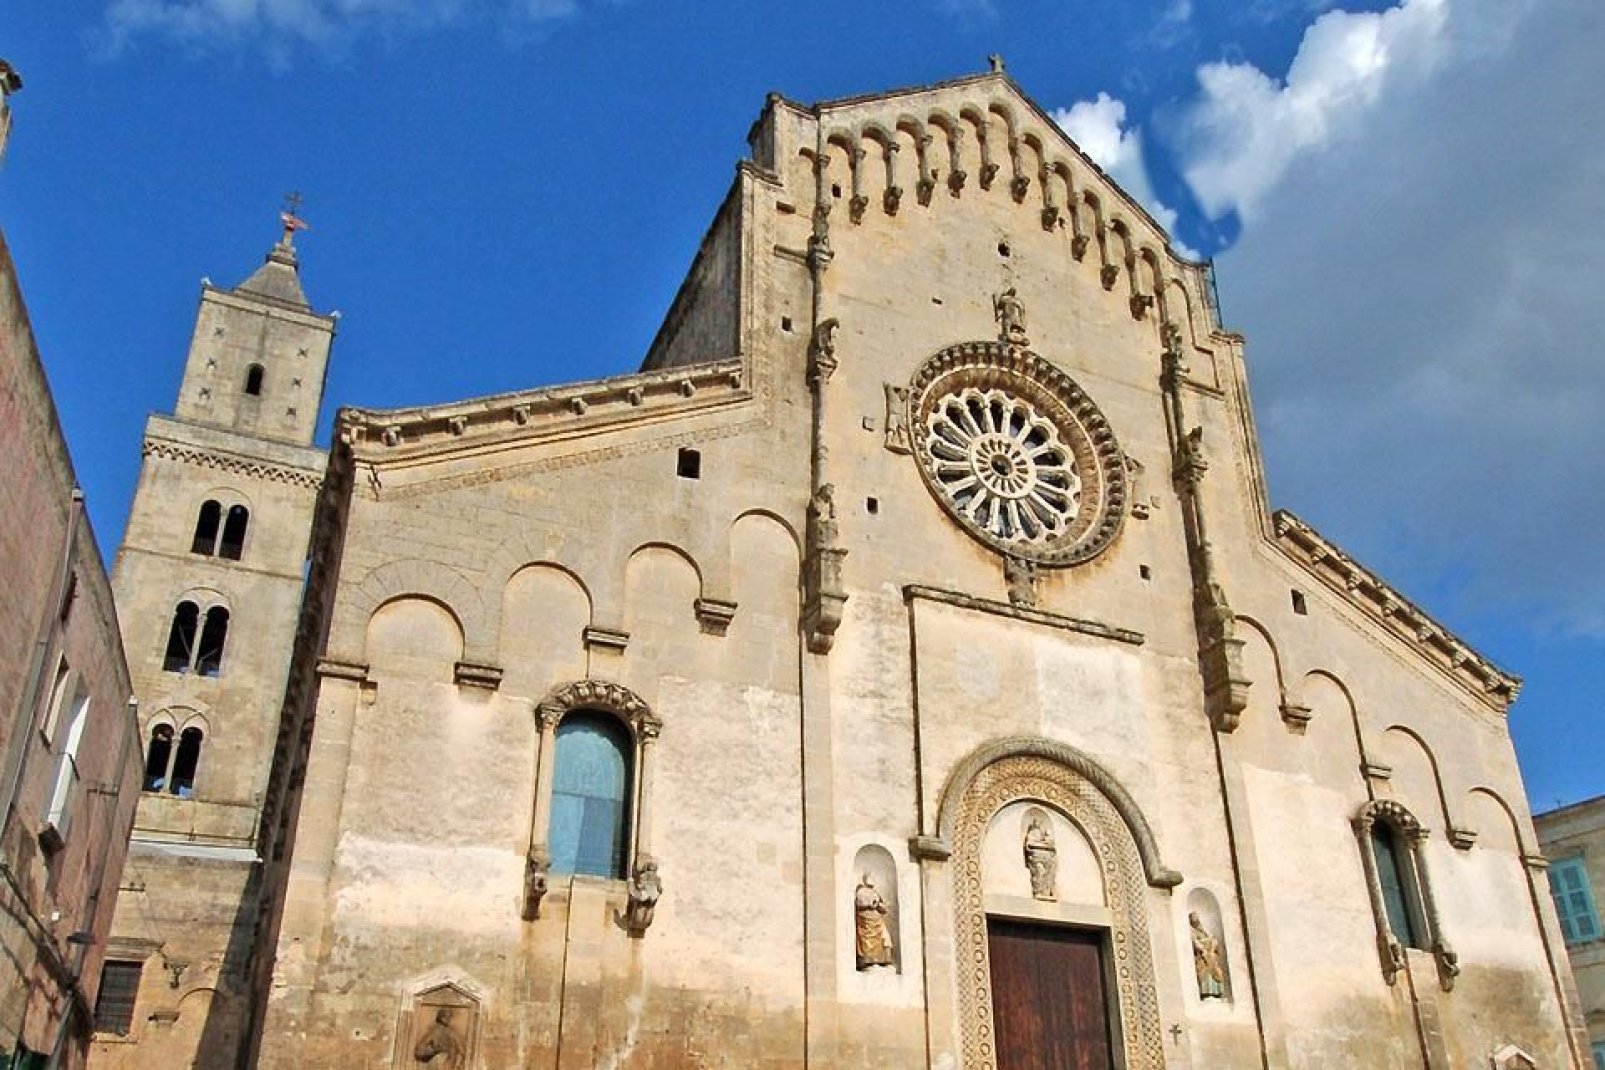 Built on the highest spur of the "Civita" which separates the two "Sassi", the 18th century Matera Cathedral was built in the Roman style typical of the Apulia region. 